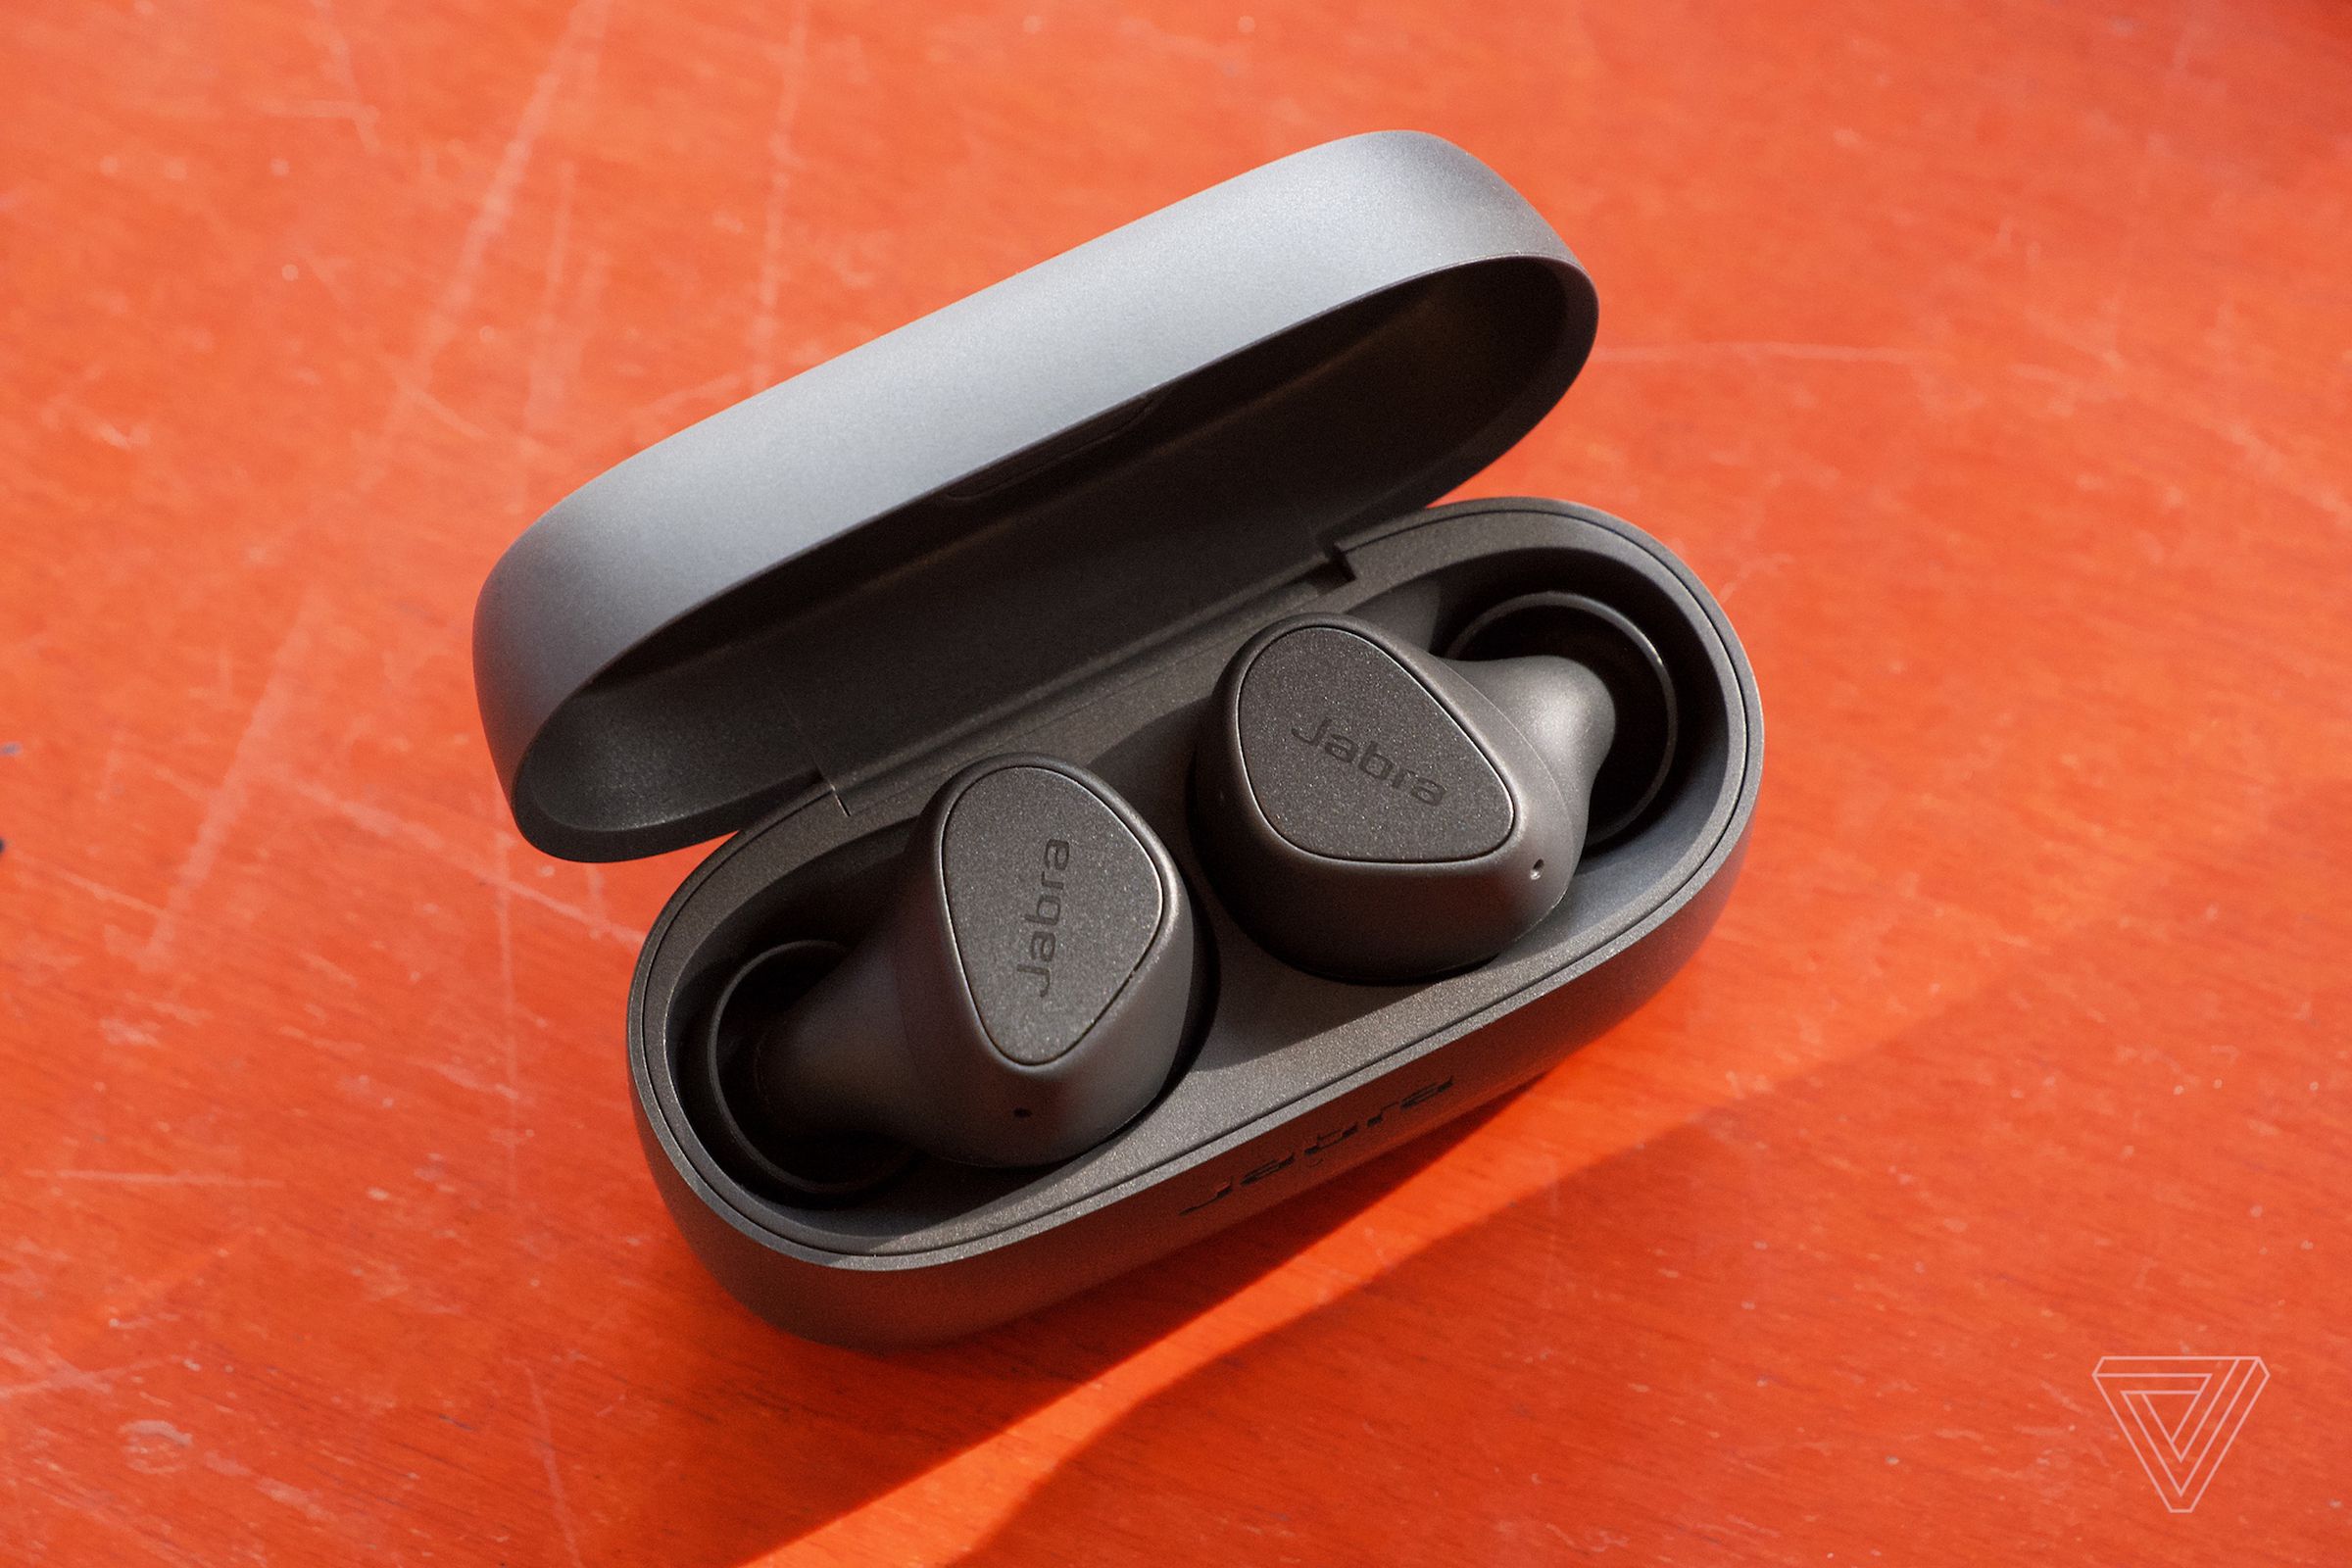 Jabra has redesigned its latest earbuds with a bit more style.